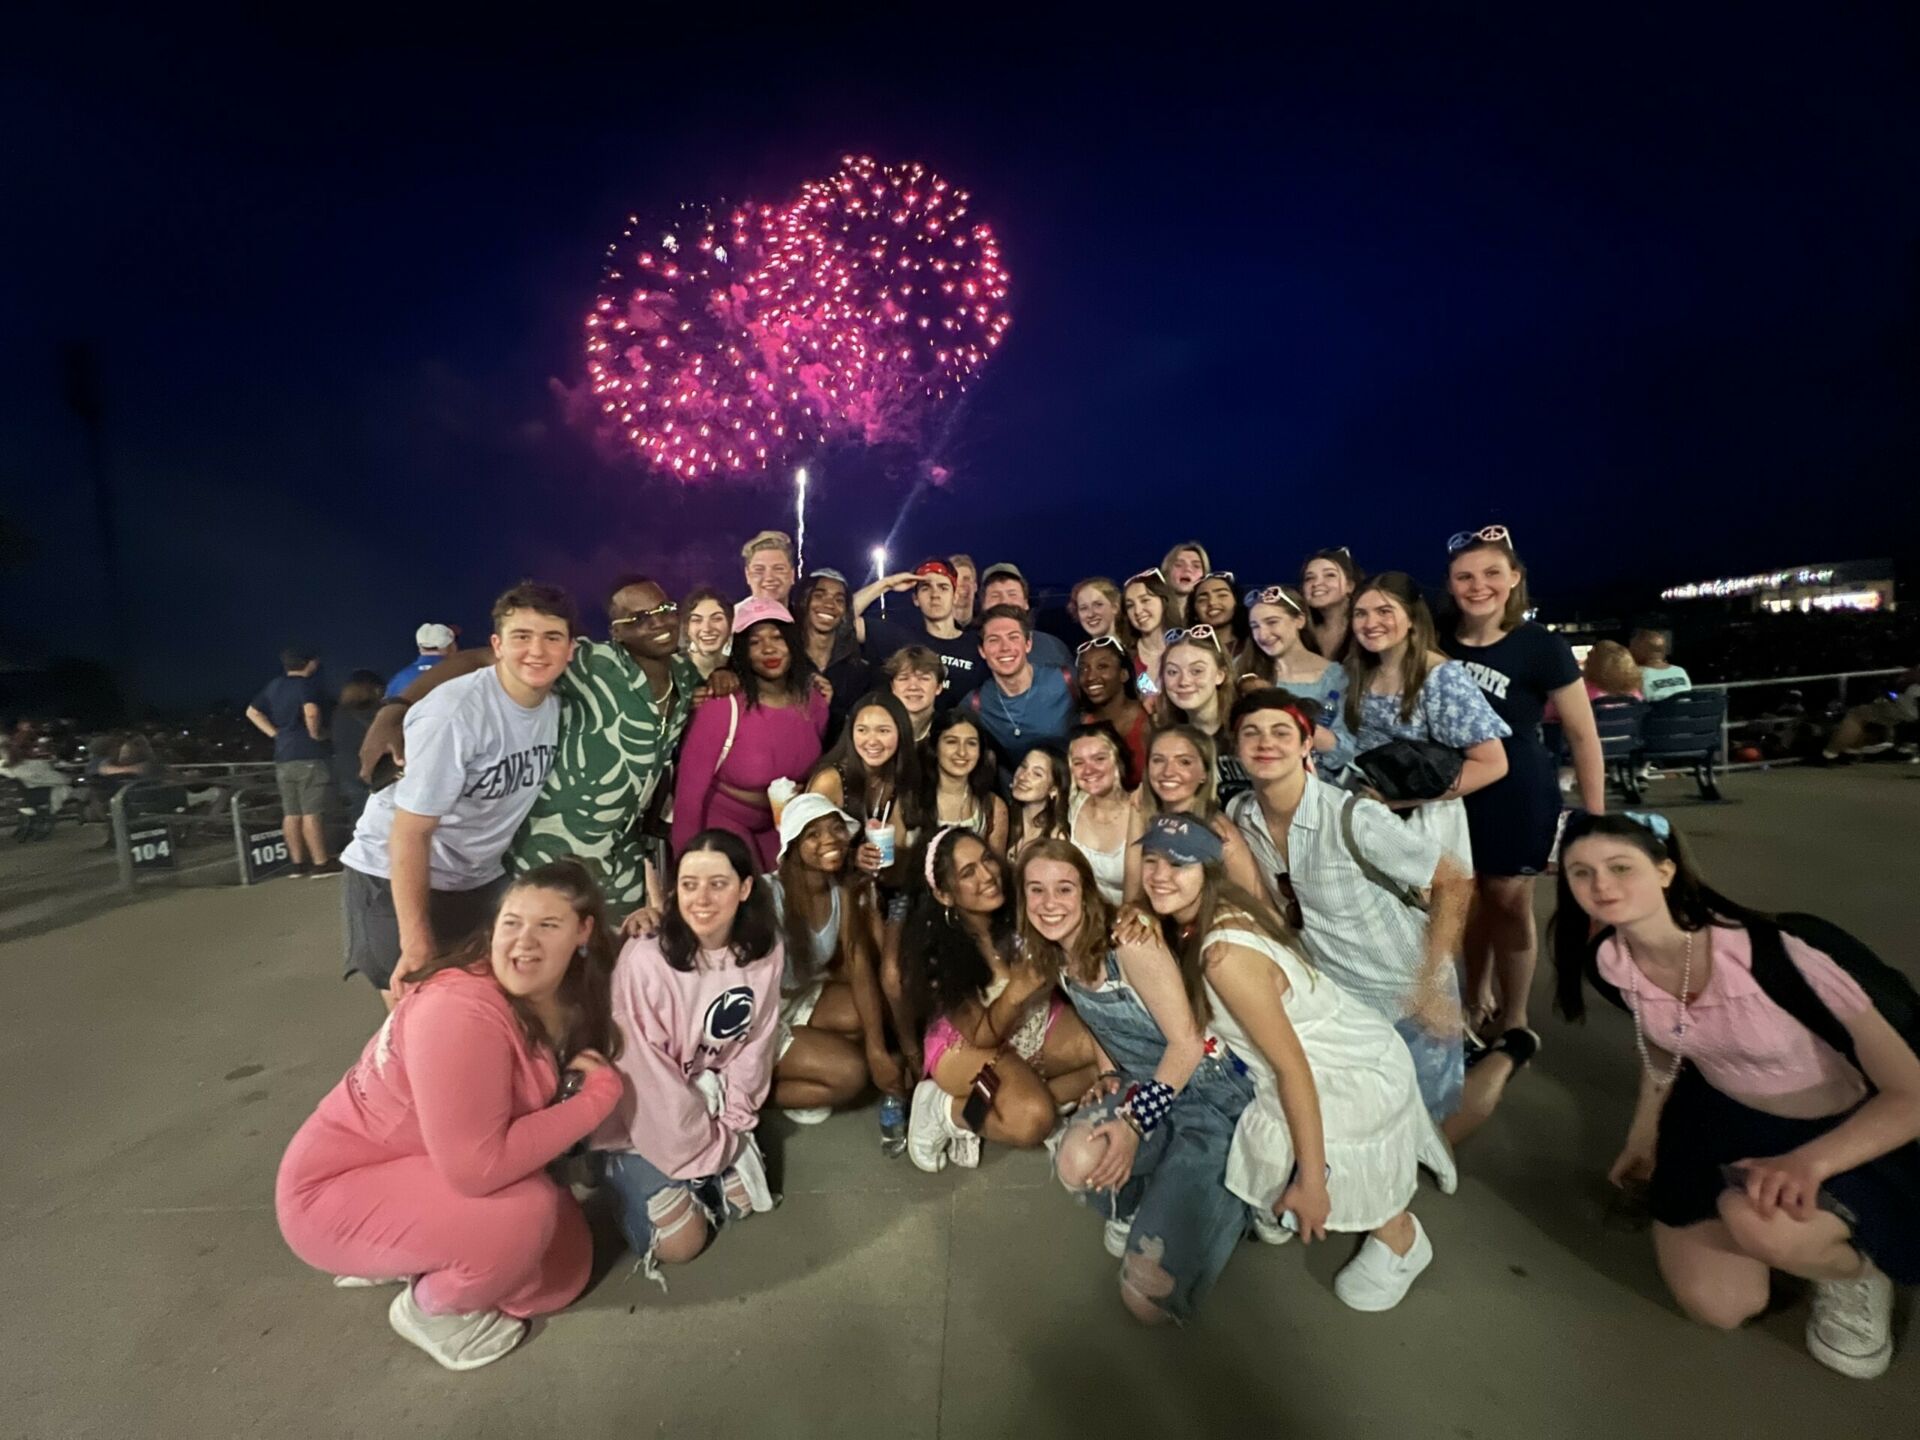 group of students pose for a photo at July 4 celebration with fireworks in night sky